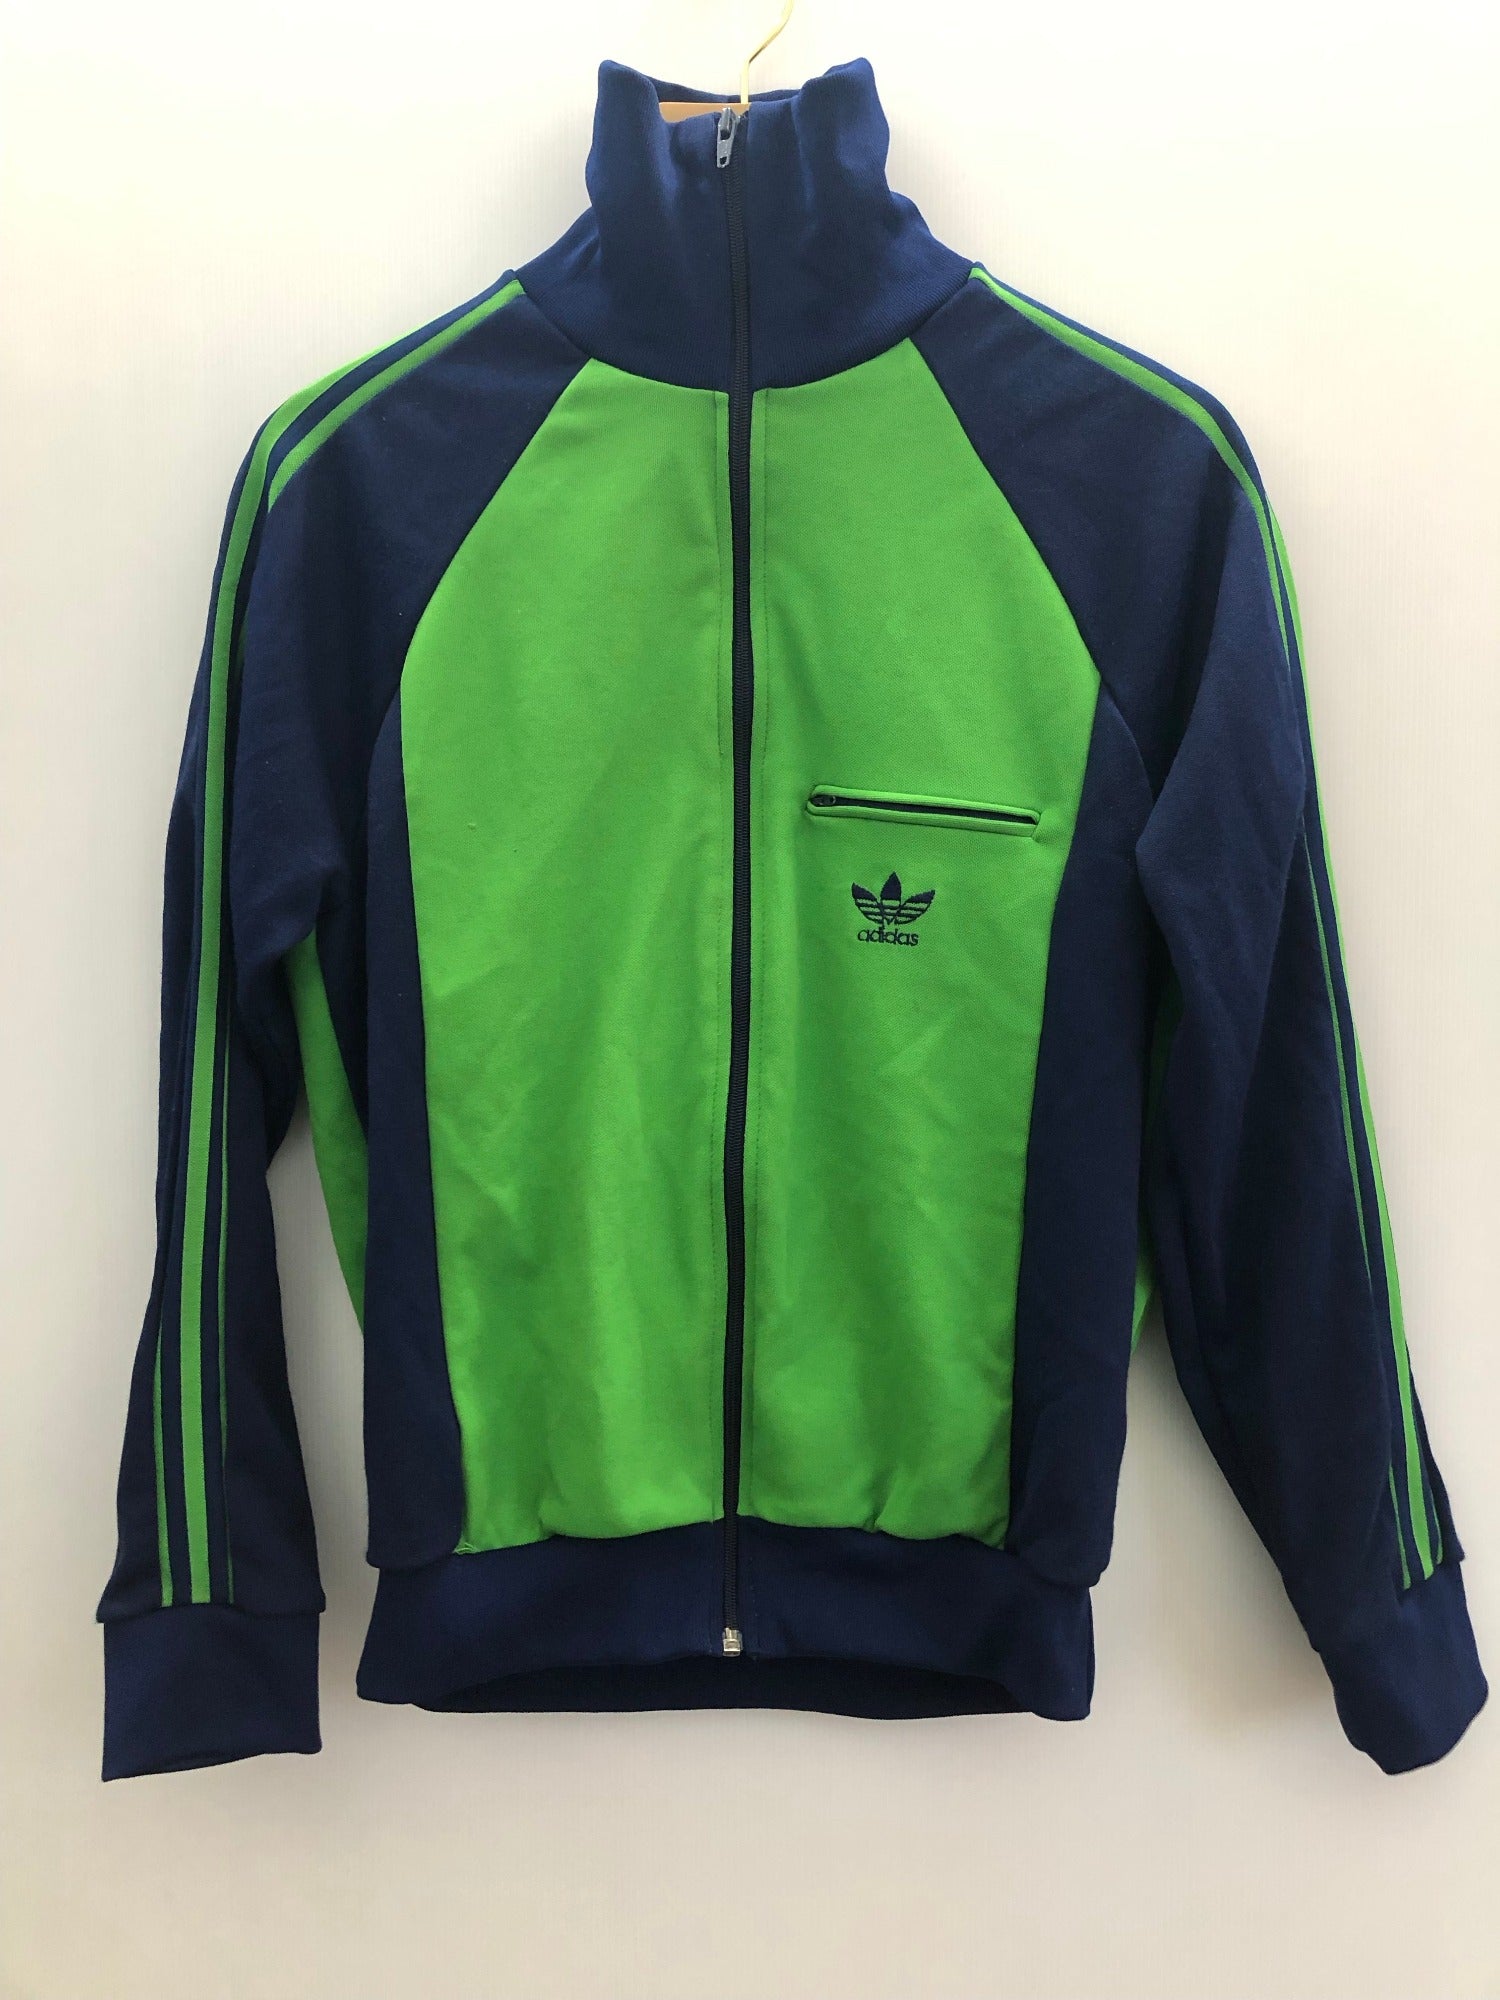 1970s Adidas Zip up Track Top in Navy and Green - Size S - Urban ...